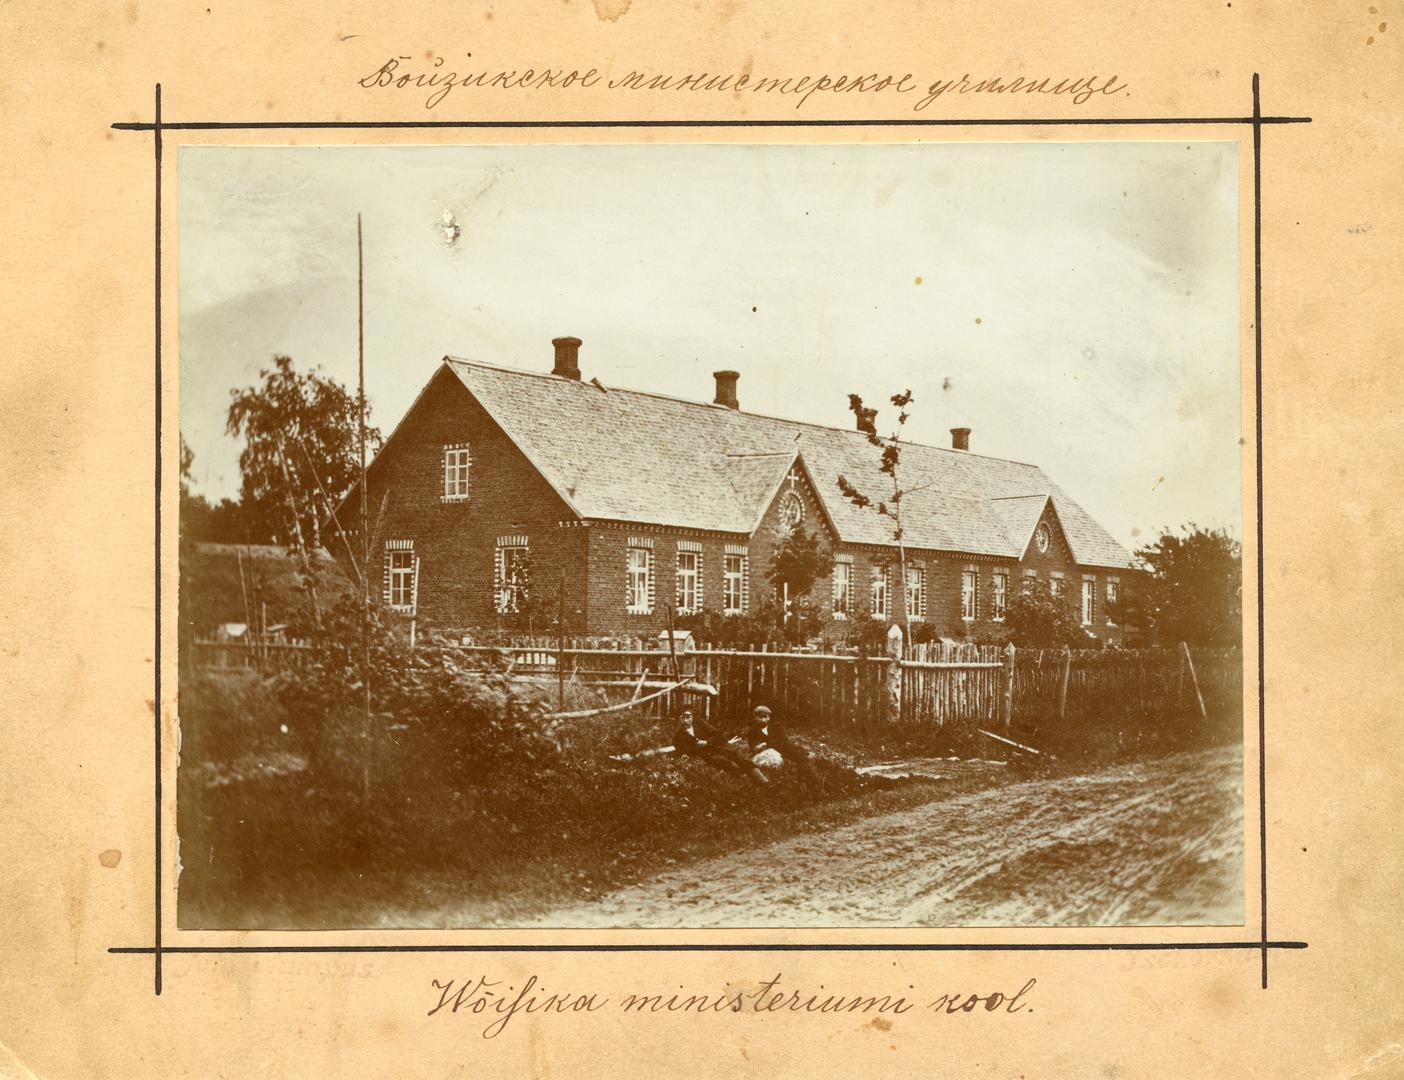 Building of the ministry school of Võisika